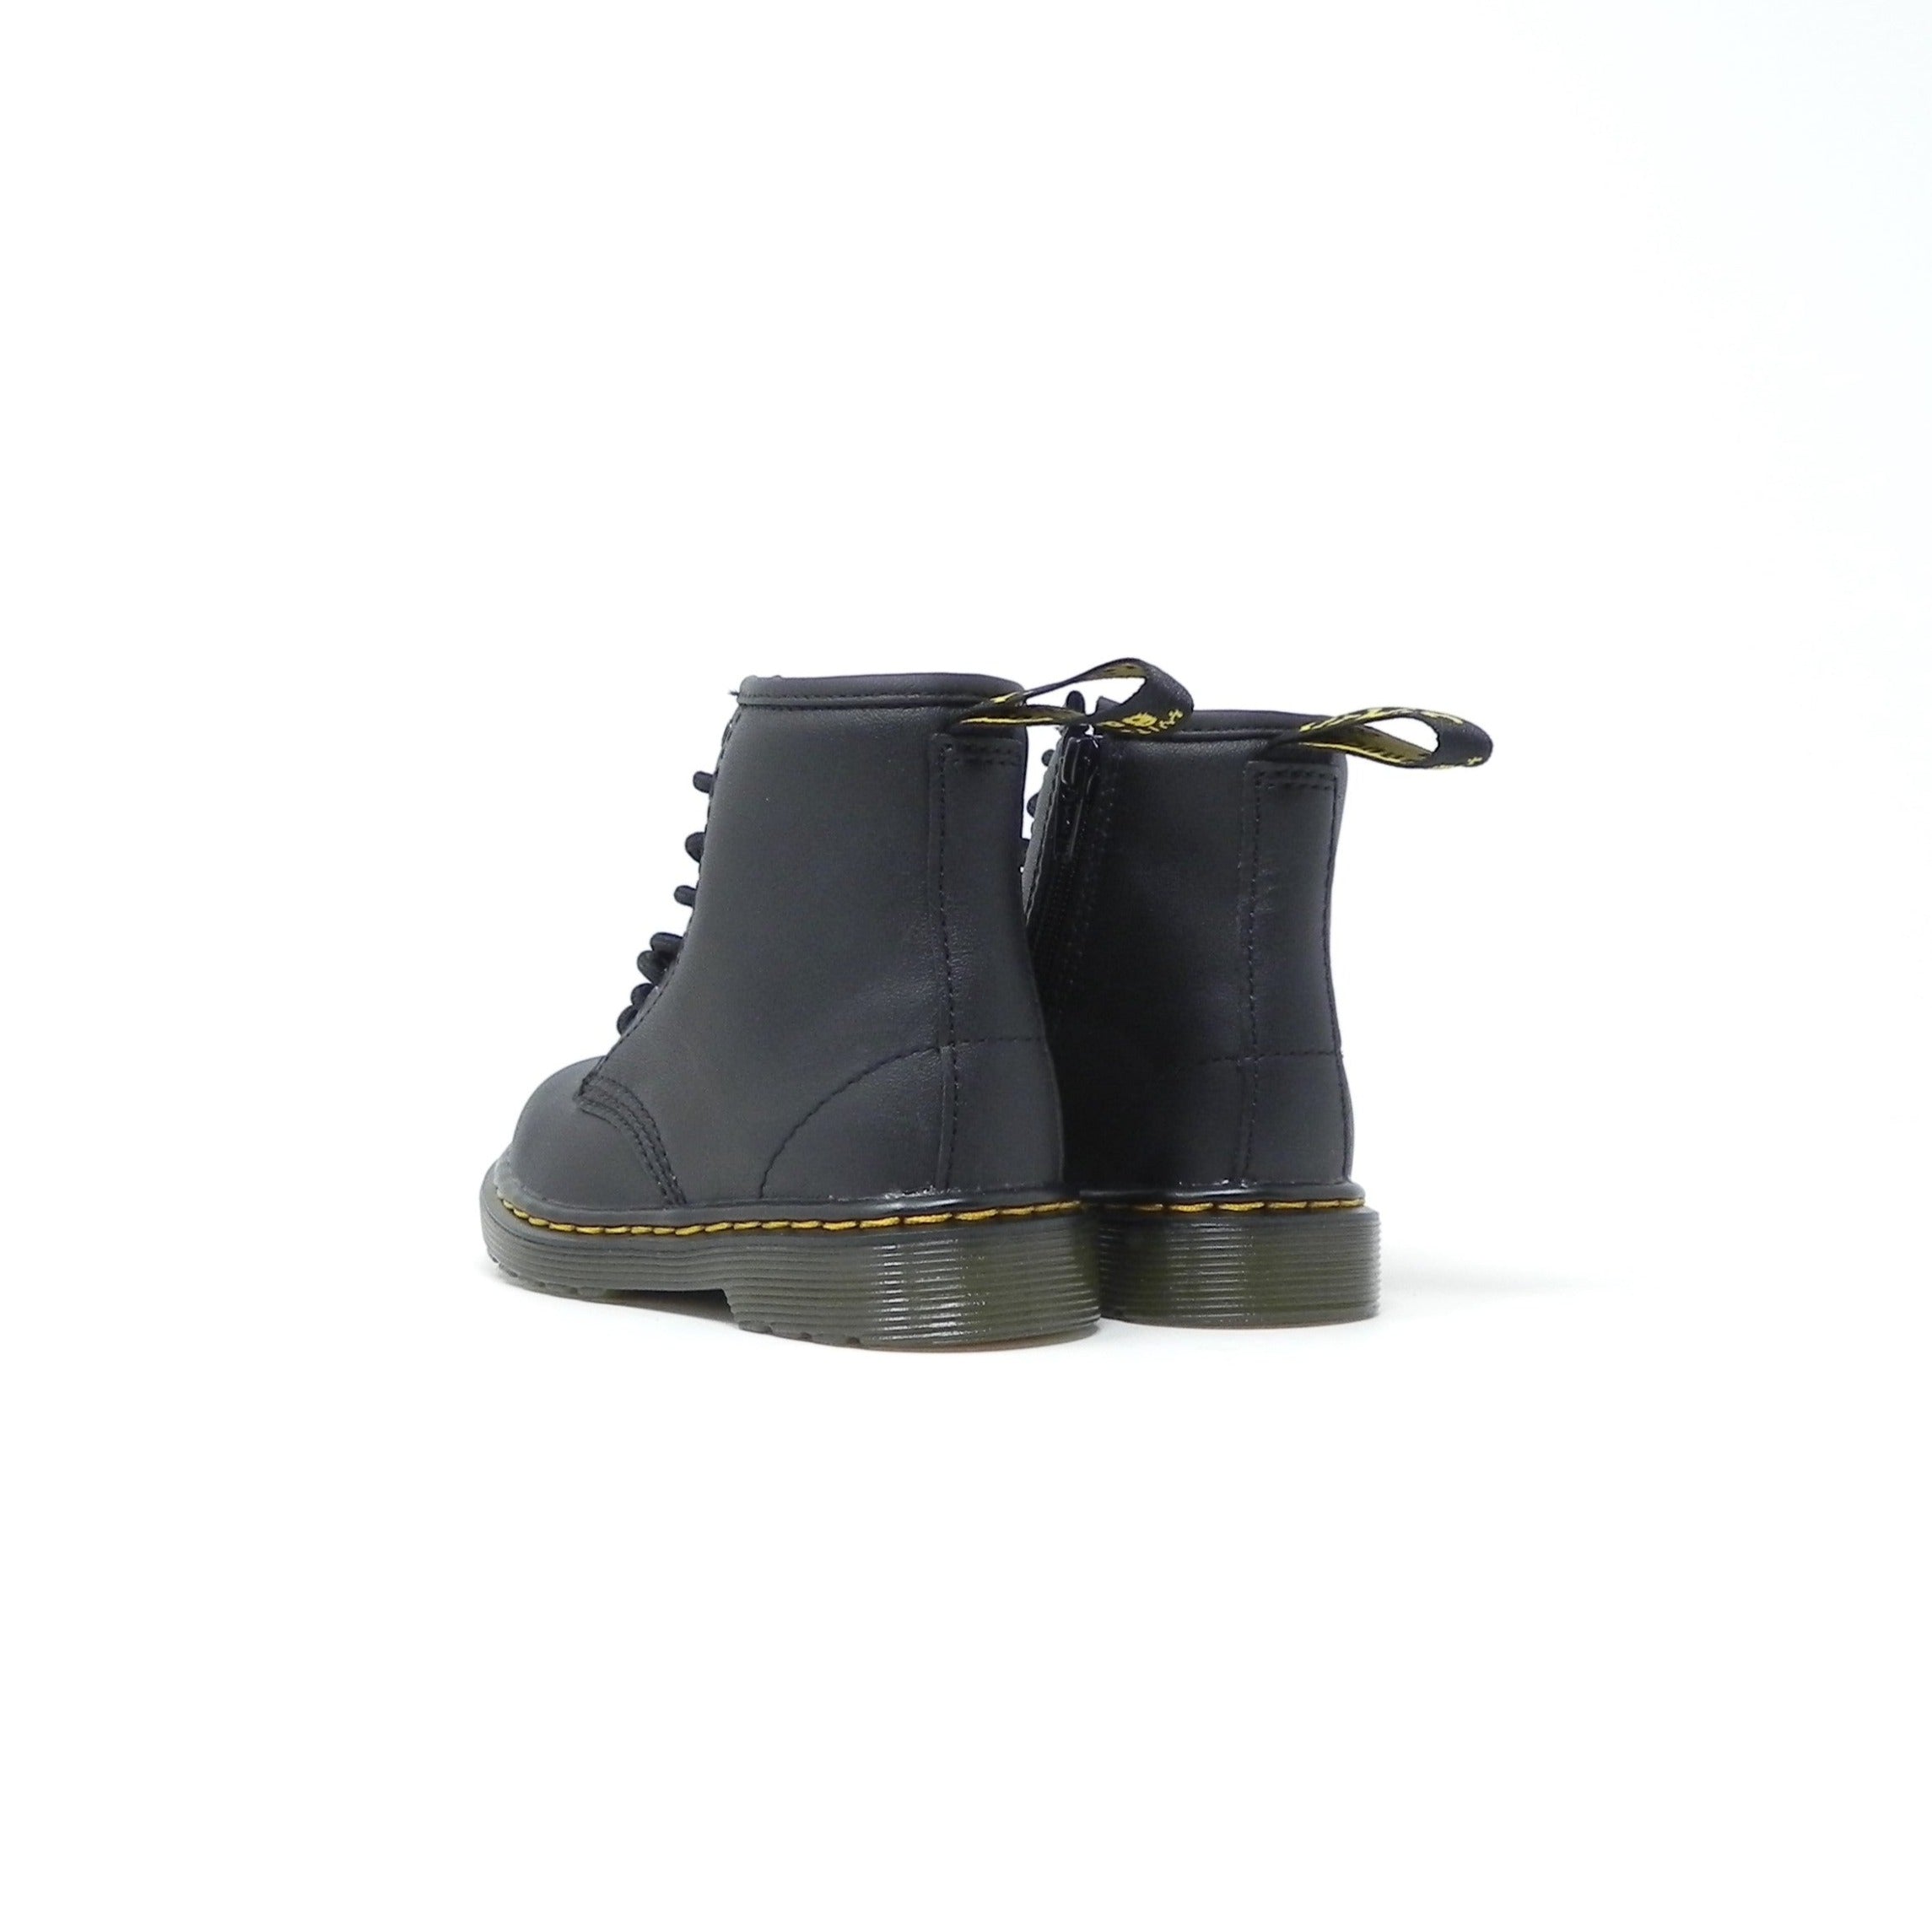 DR. MARTENS - Stivaletti Anfibi Softy t infant